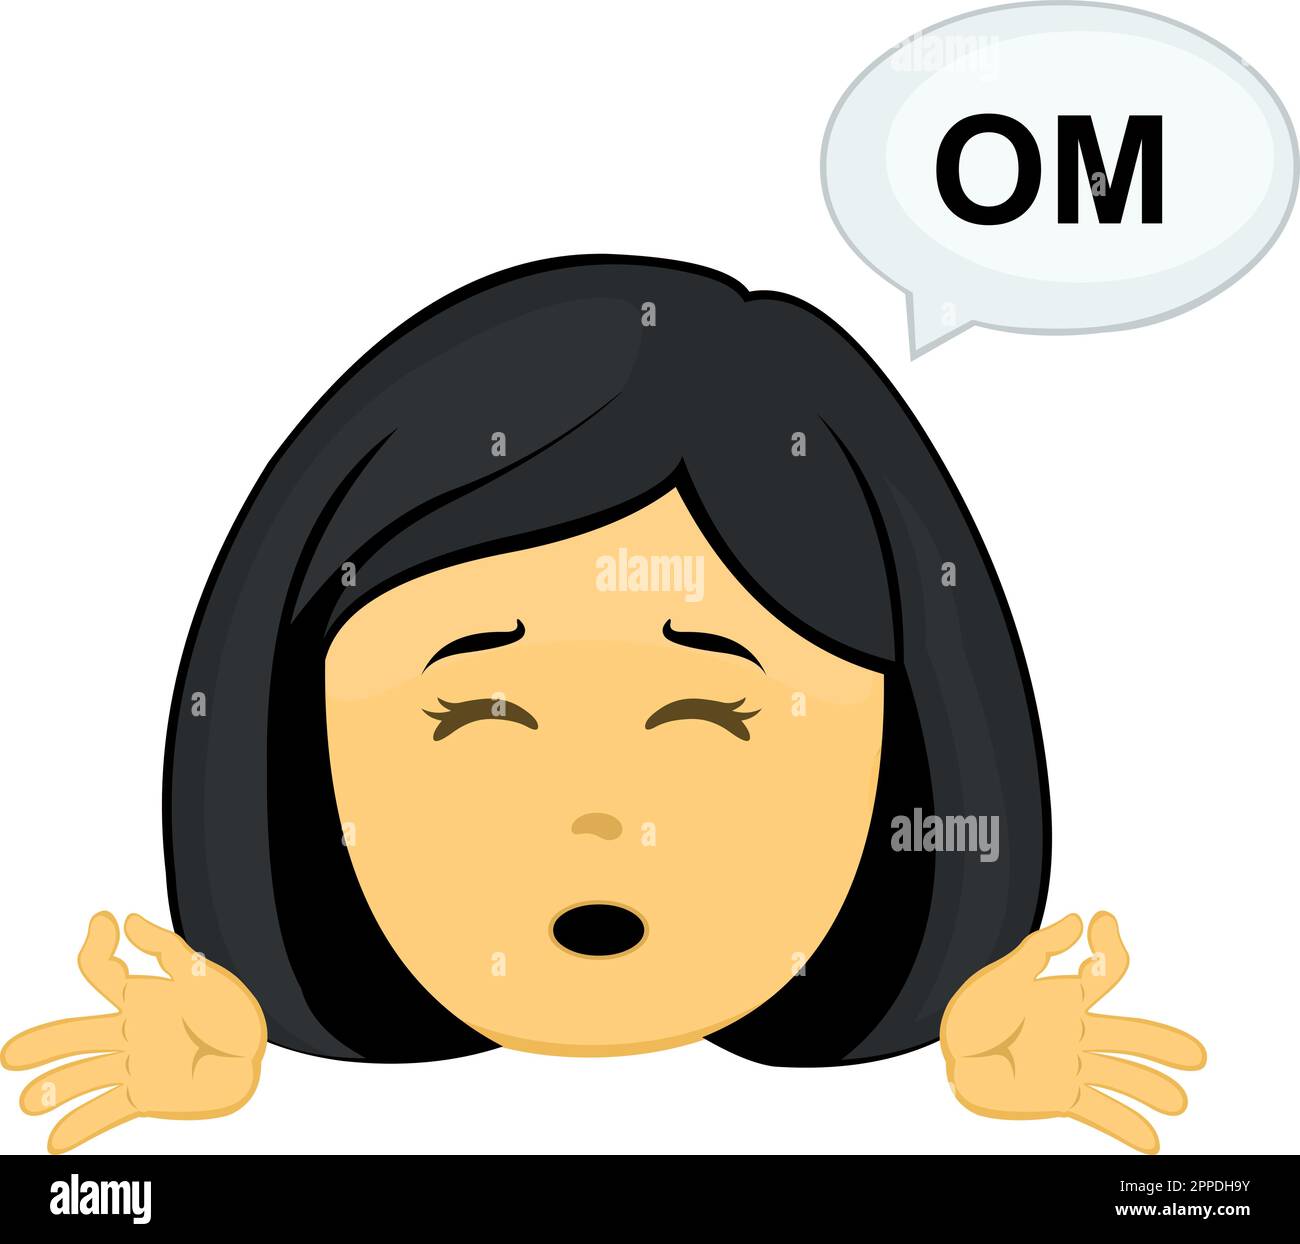 vector illustration face of emoticon yellow character woman meditating with a speech bubble with the text OM Stock Vector